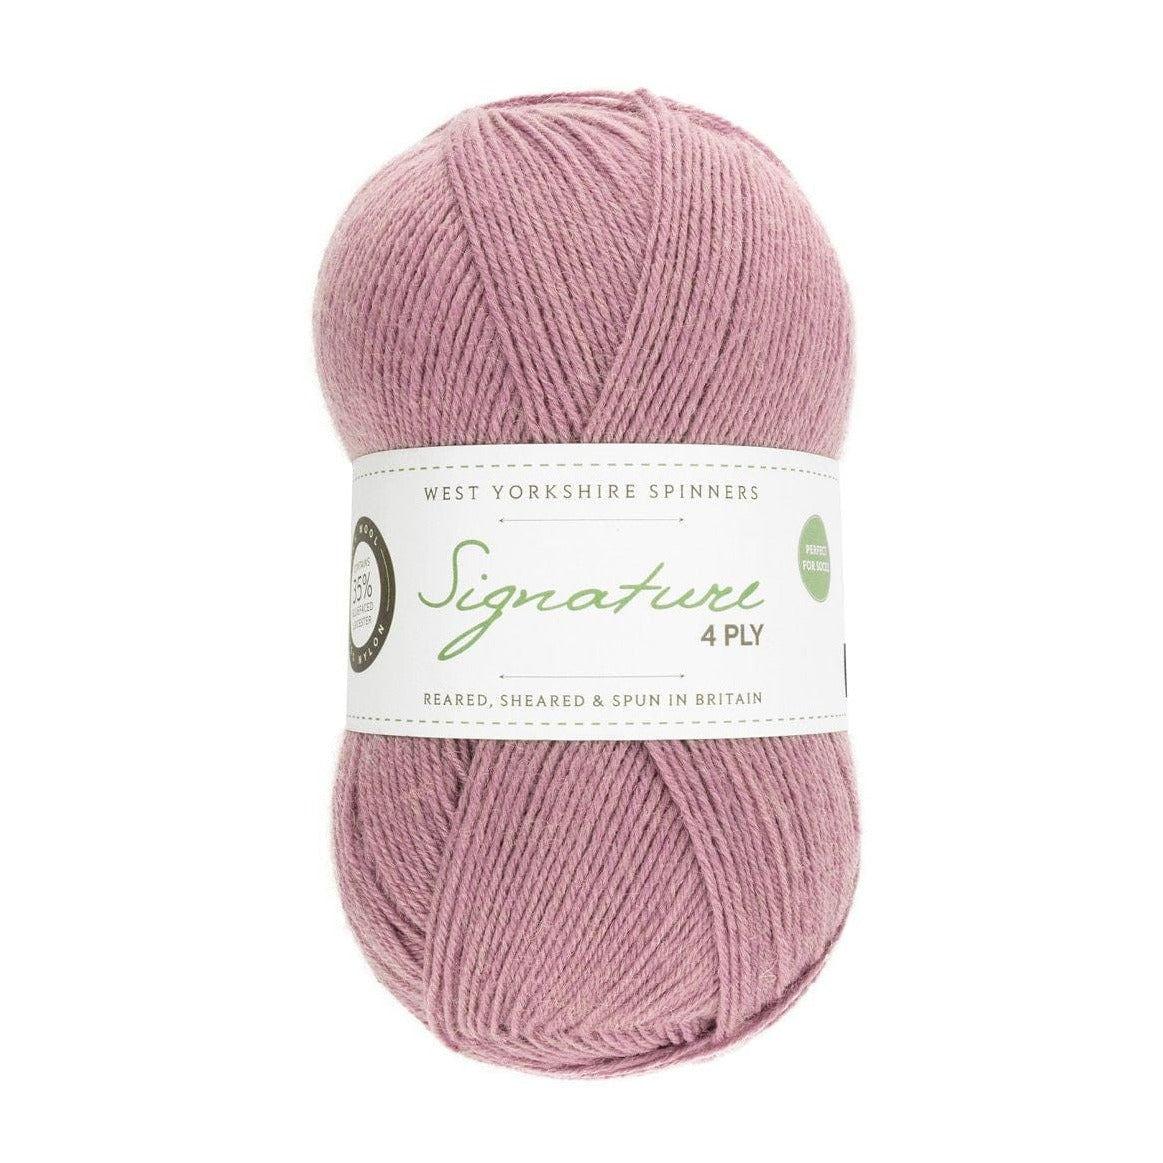 West Yorkshire Spinners Yarn Pennyroyal (530) West Yorkshire Spinners Signature 4 Ply Plain Colour Sock Yarn